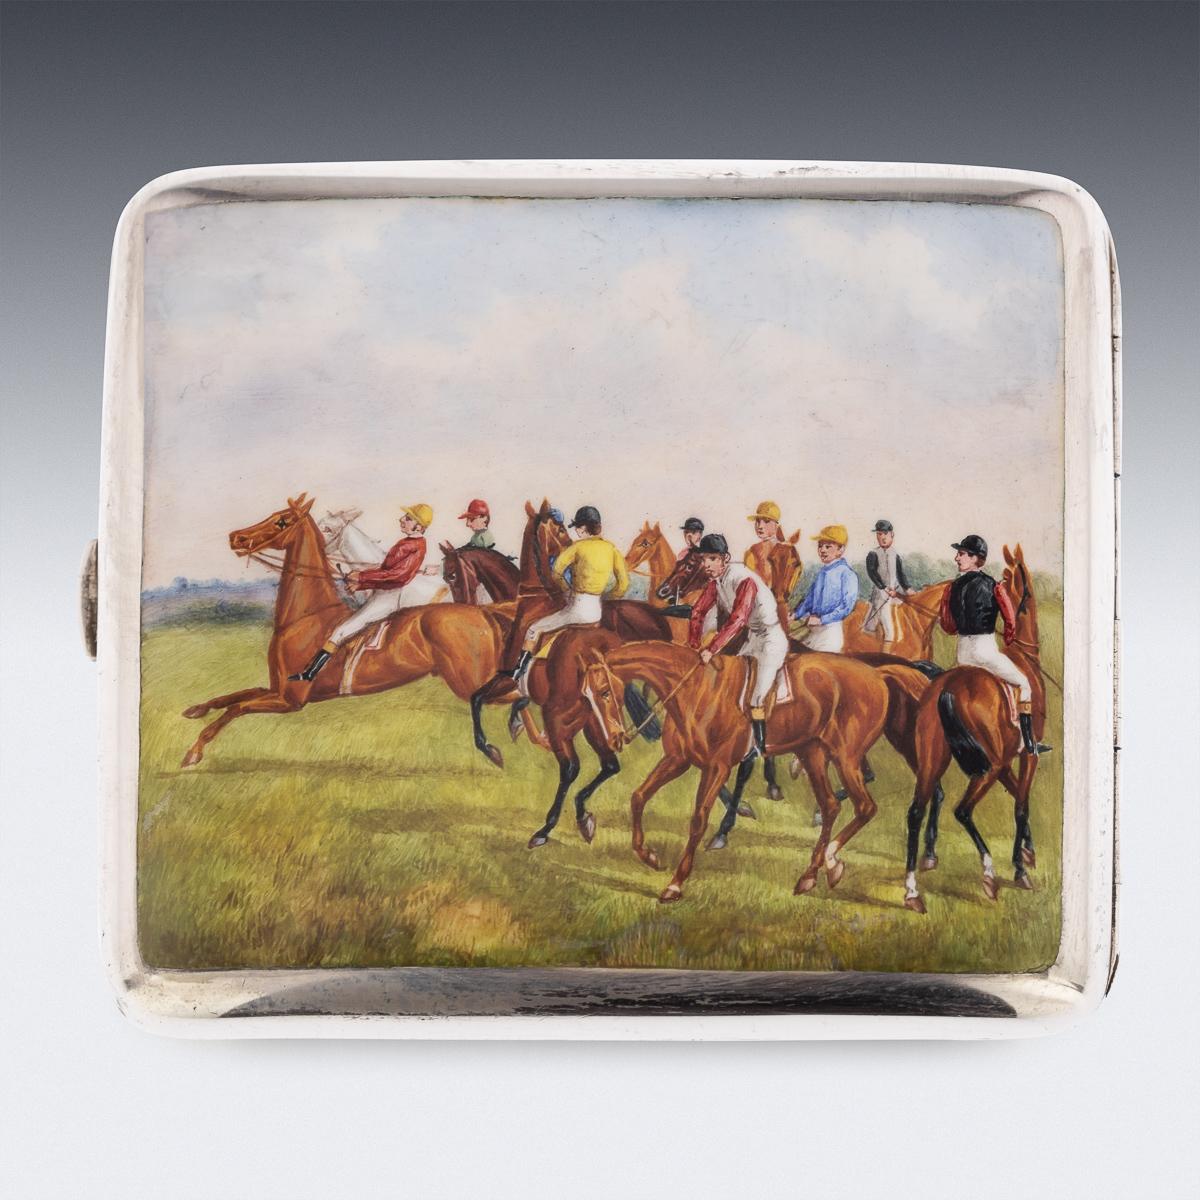 Antique late-19th Century Victorian solid silver & enamel cigarette case, of slightly curved rectangular form with rounded corners, depicting horses mounted with jockeys at the start of a race and richly parcel gilt interior. Both sides are